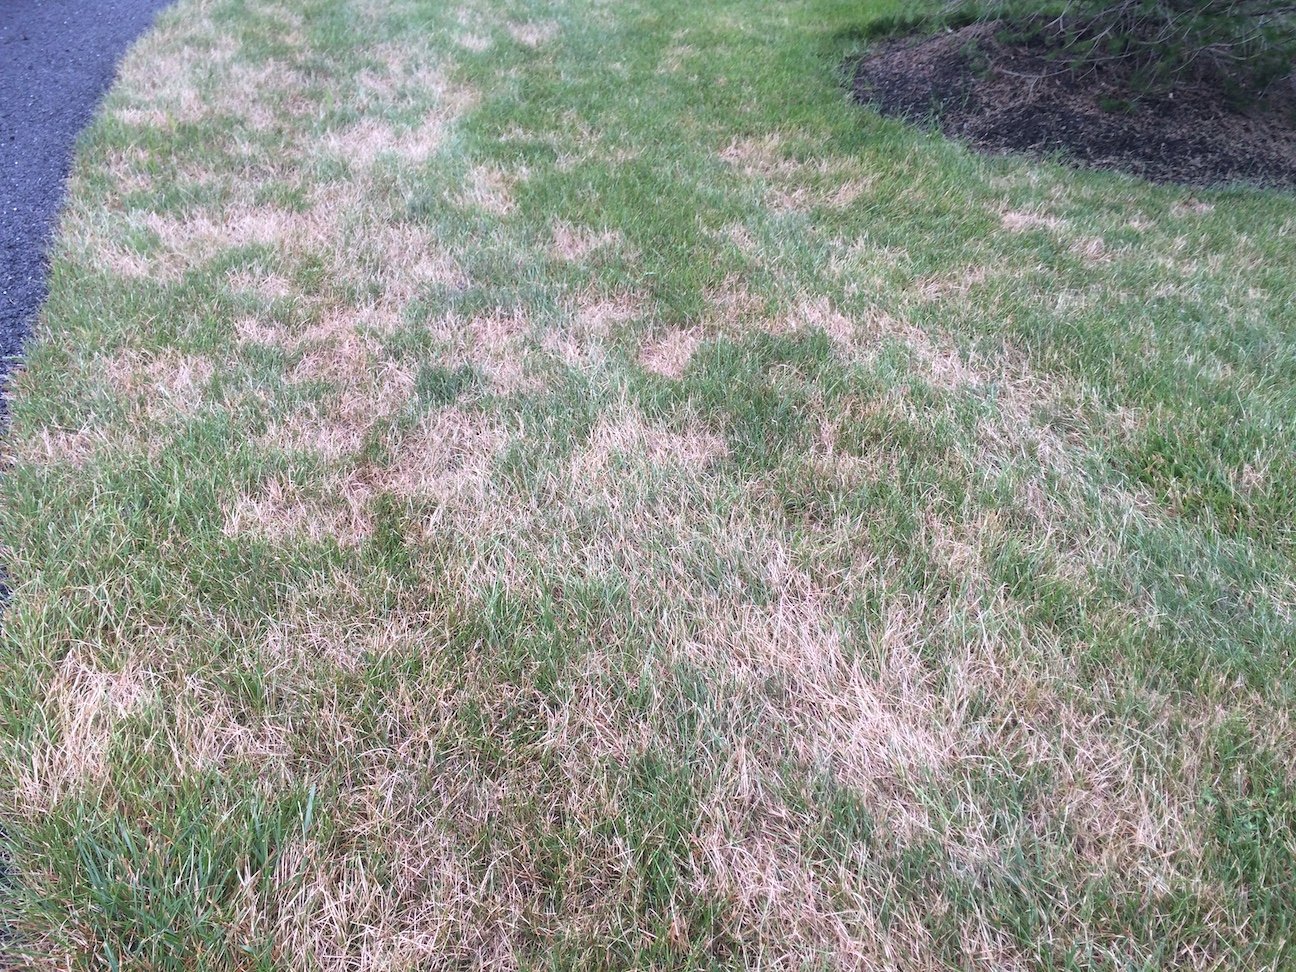 Brown spots in your yard